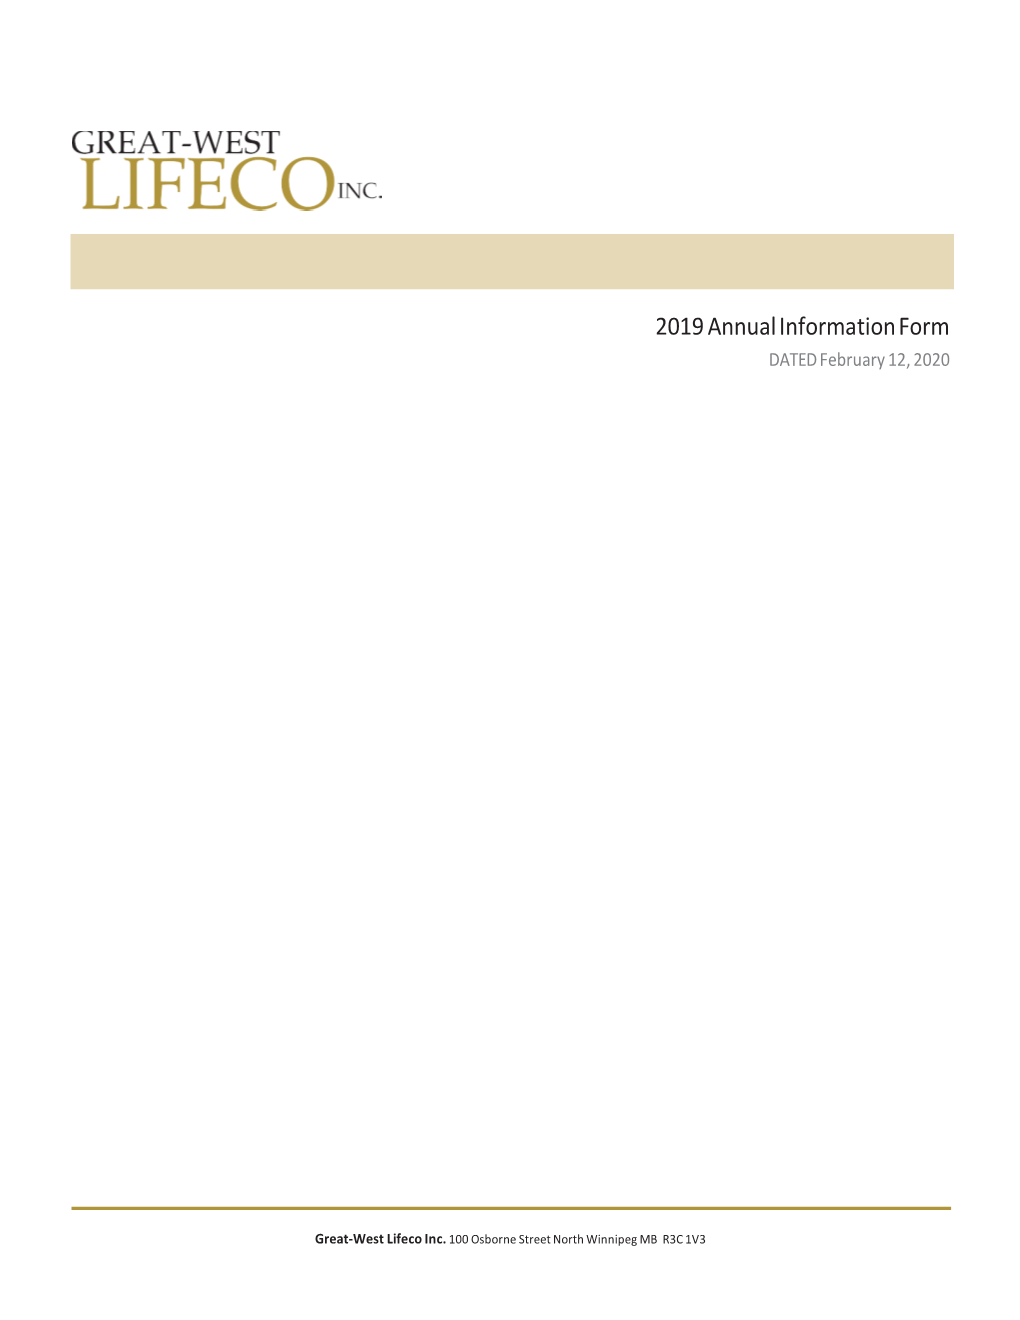 Lifeco Annual Information Form 2019